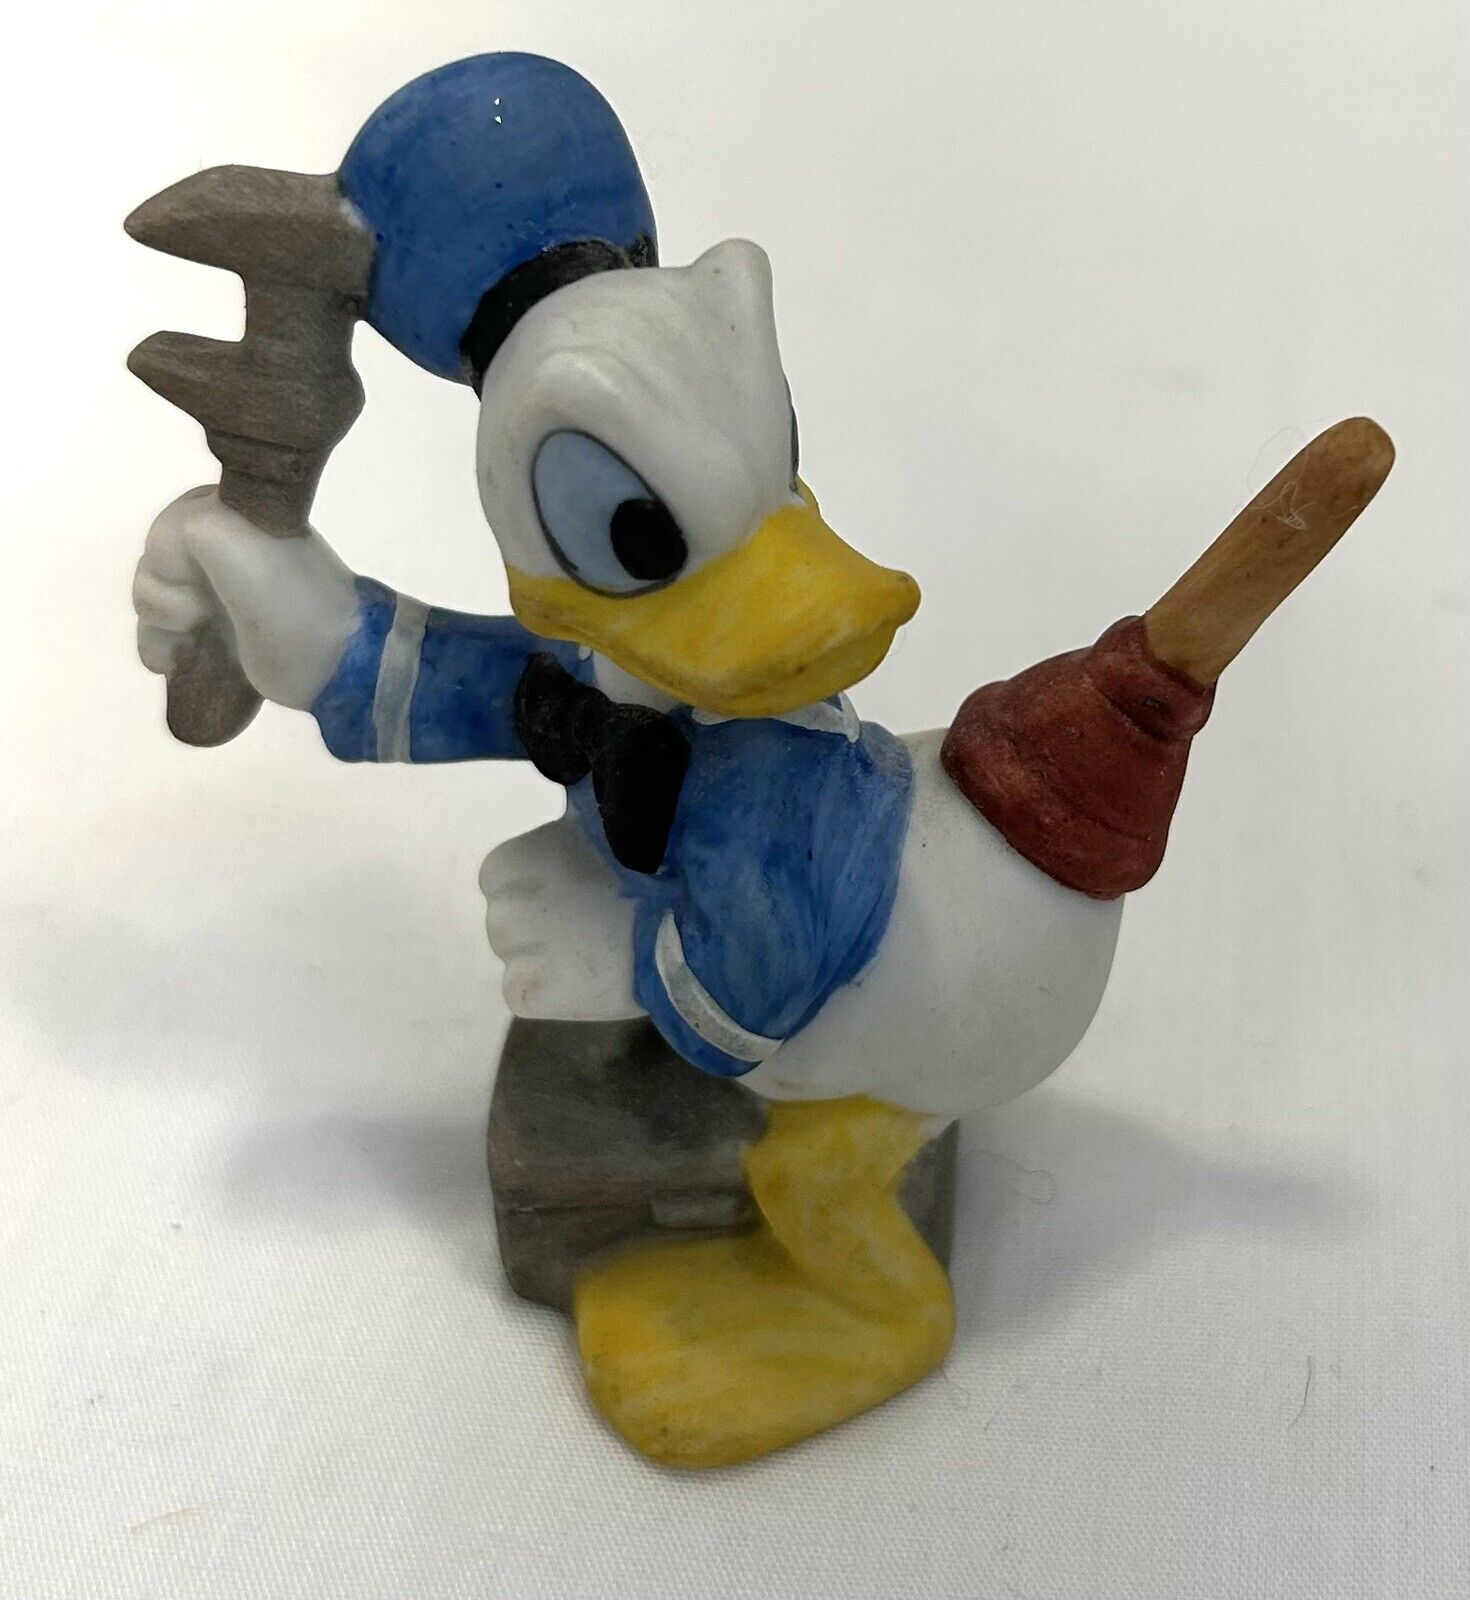 Vintage Donald Duck Holding Wrench Plunger on Tail Figurine Walt Disney